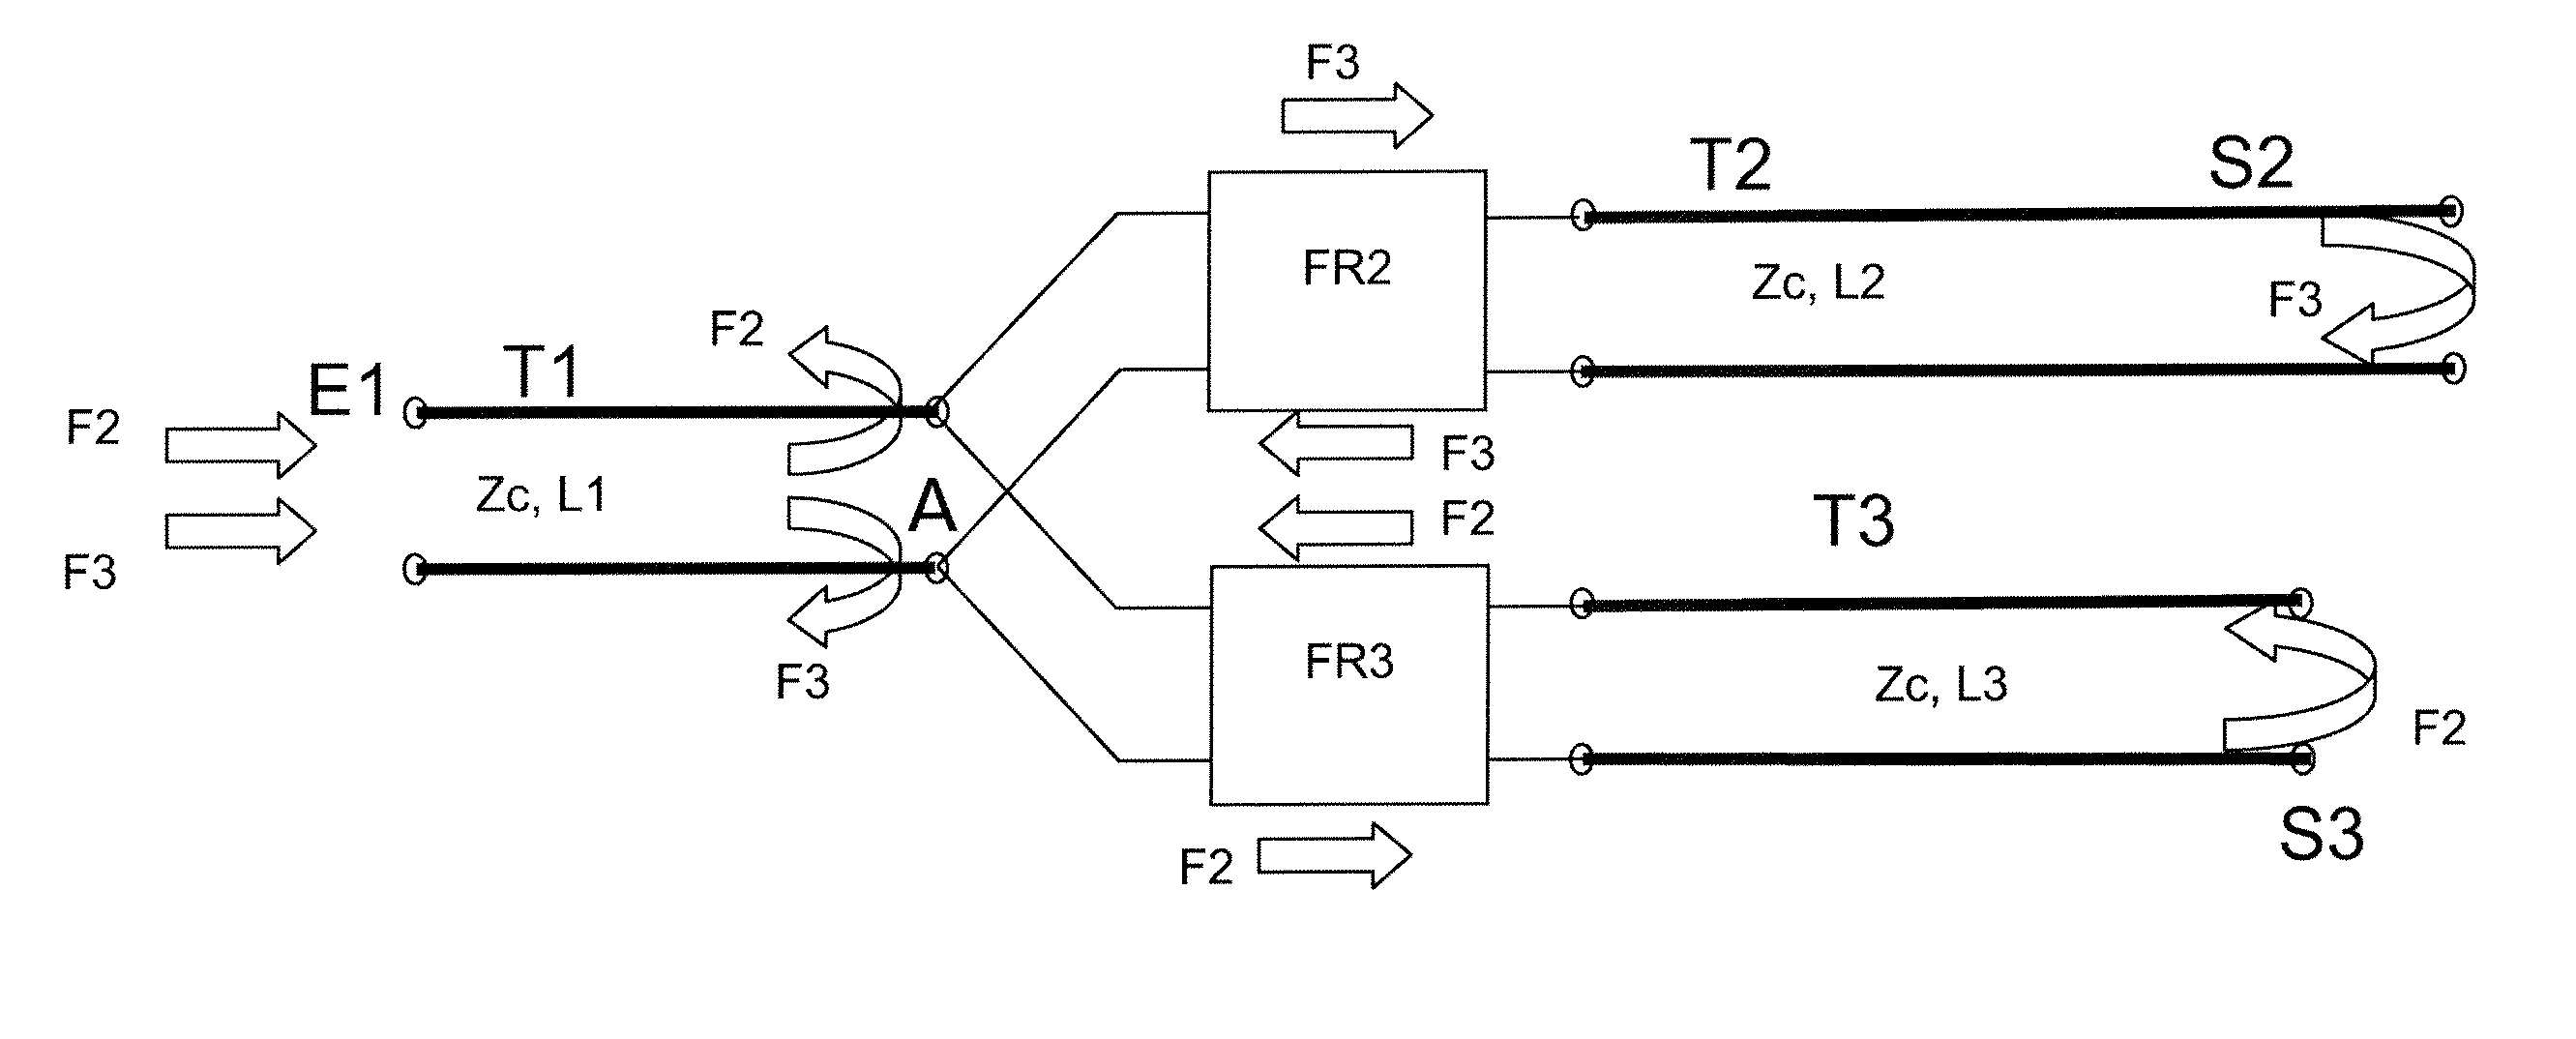 Method and device for analyzing electric cable networks